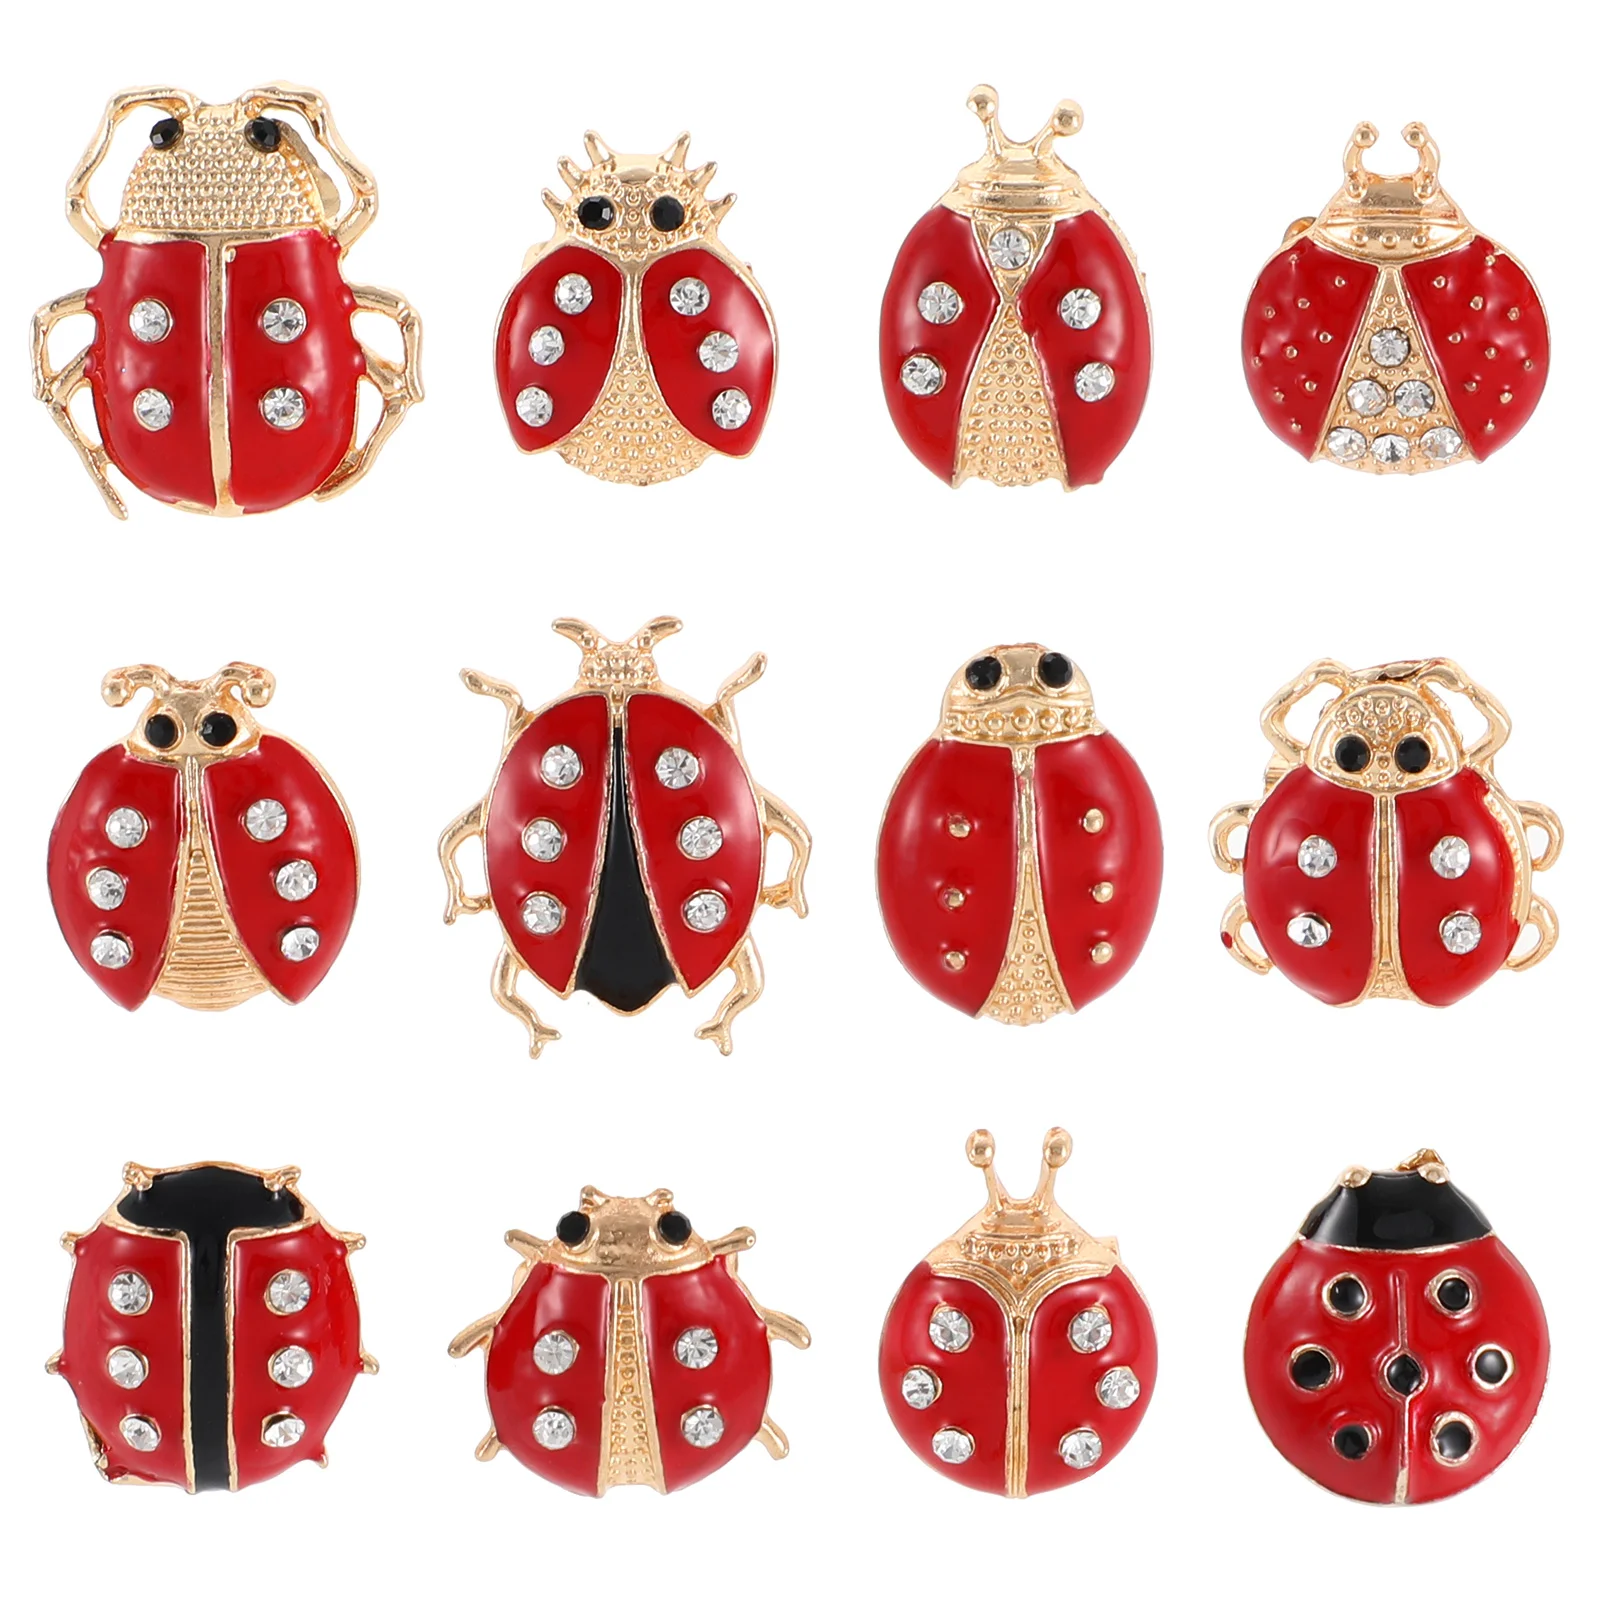 

12Pcs Brooch Delicate Insect Ladybug Clothes Breastpin for Female Lady Woman Girl